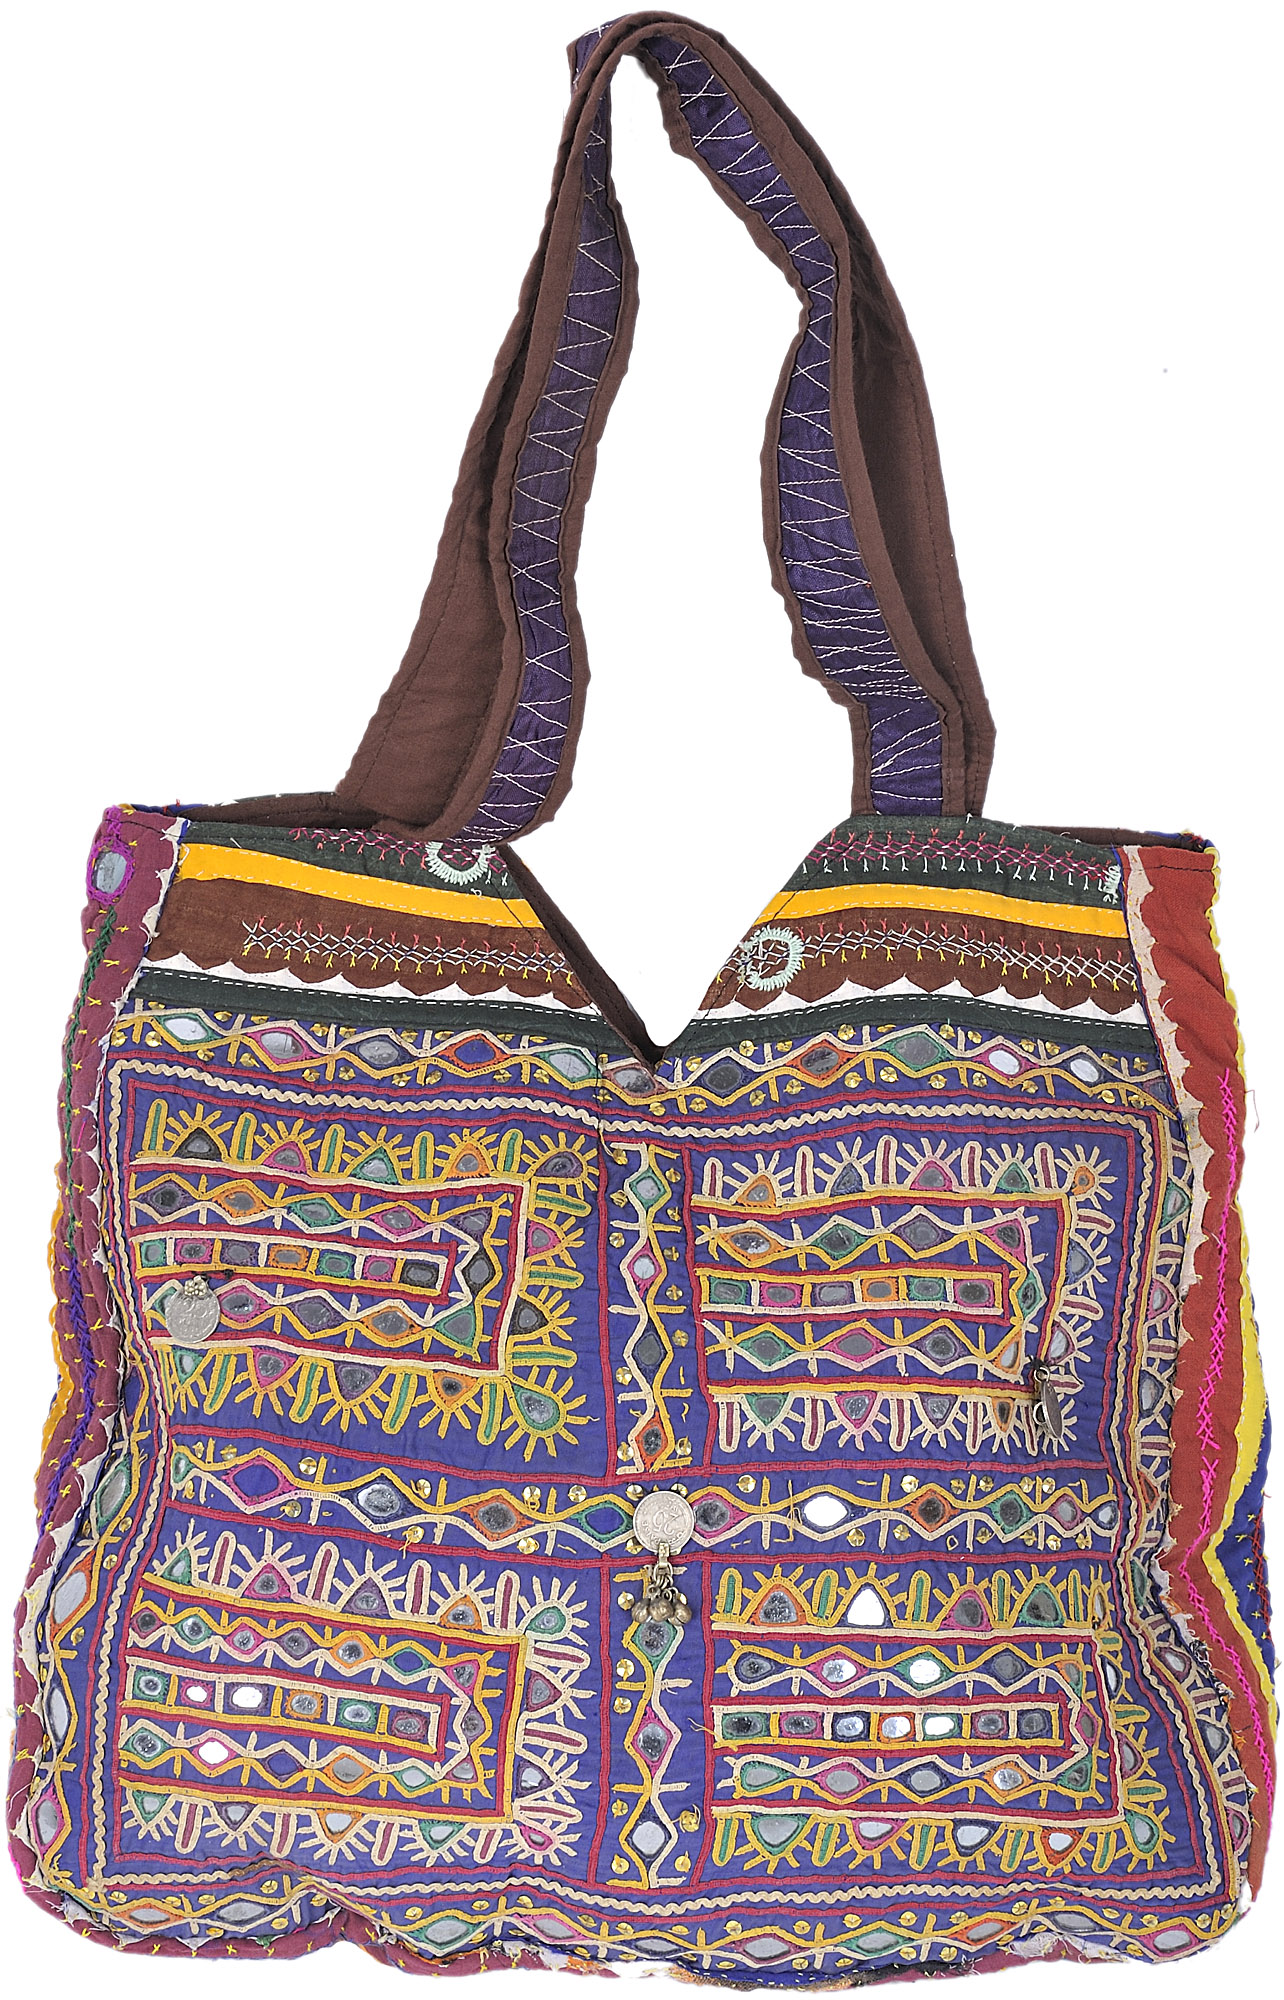 Shopper Bag from Kutch with Antique Rabari Embroidery | Exotic India Art